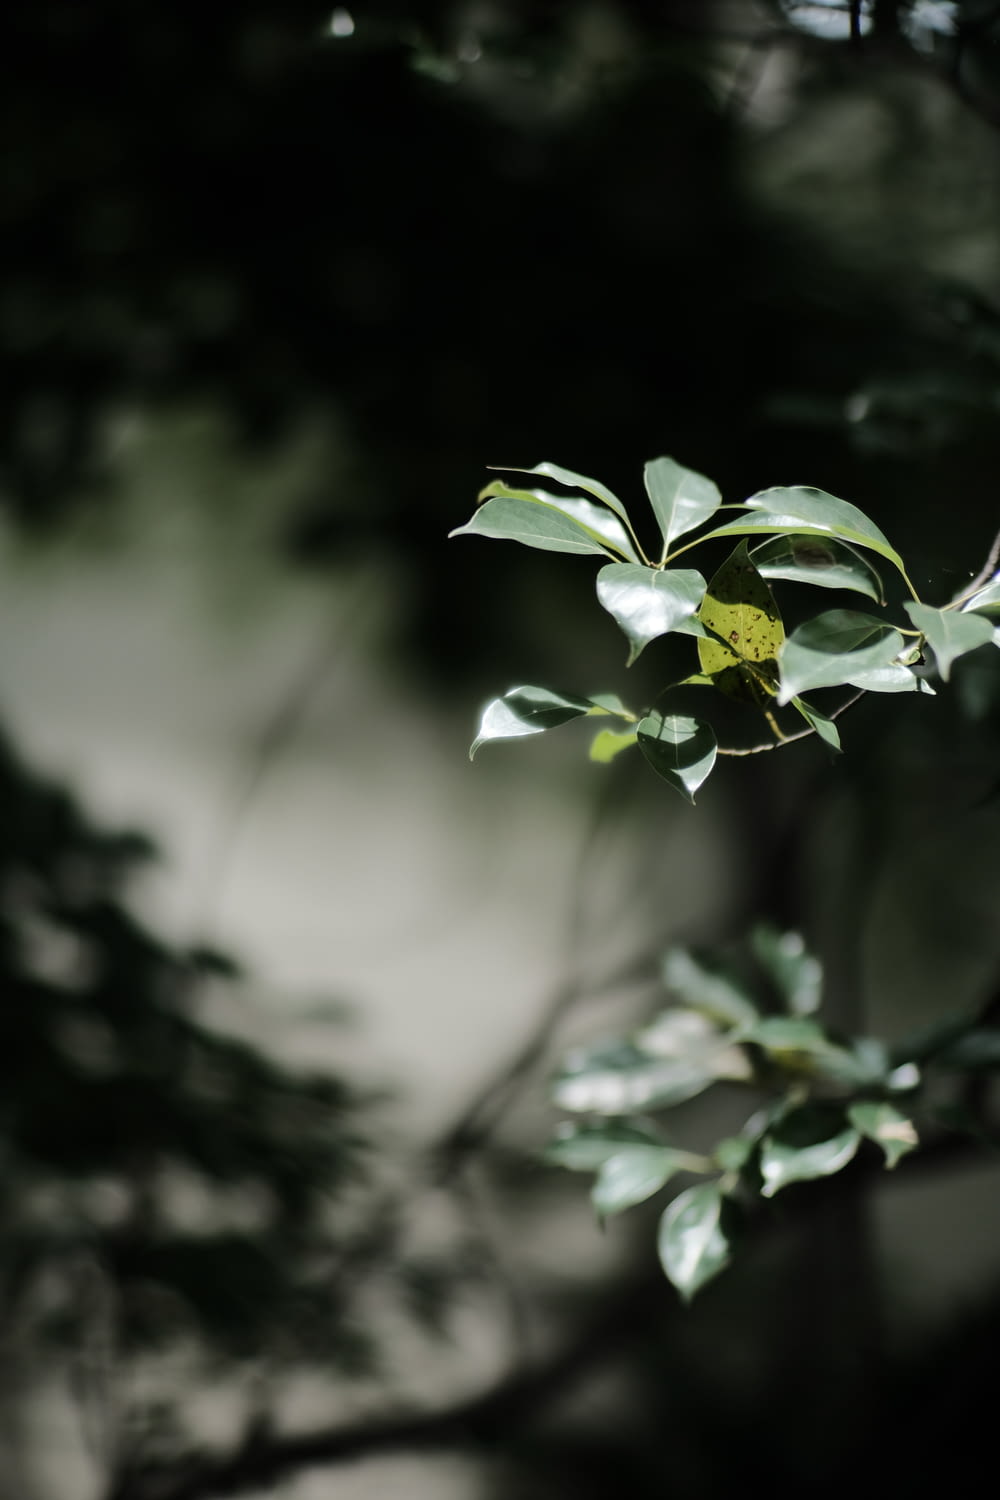 a leafy tree branch with a yellow flower on it